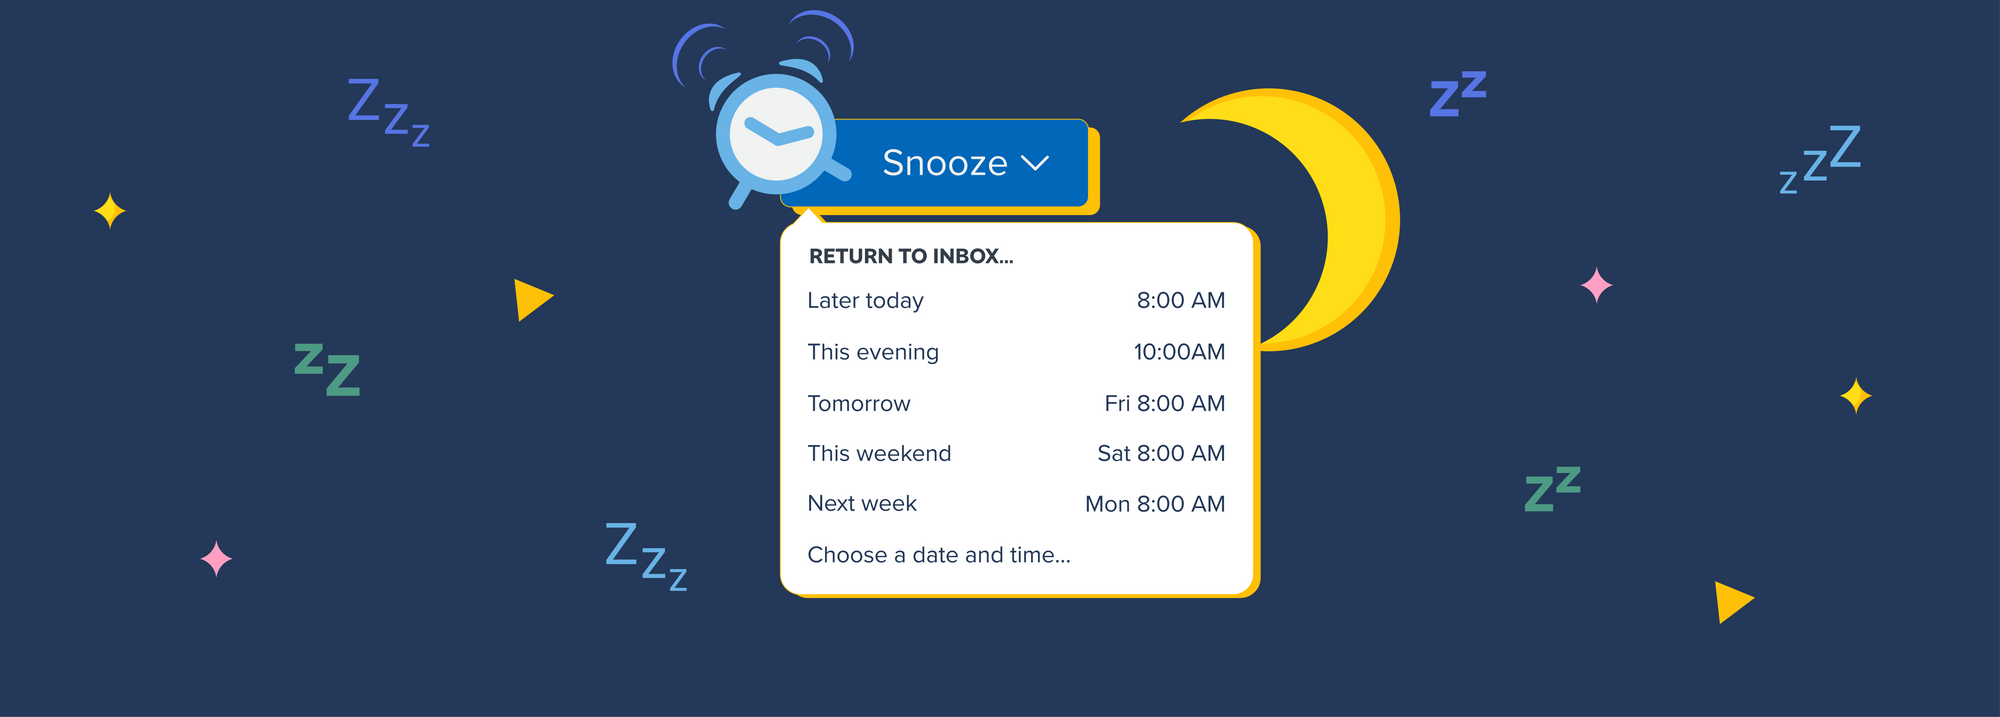 Blog Decide When You Want to Receive Emails With Our Snooze Feature Hero Image